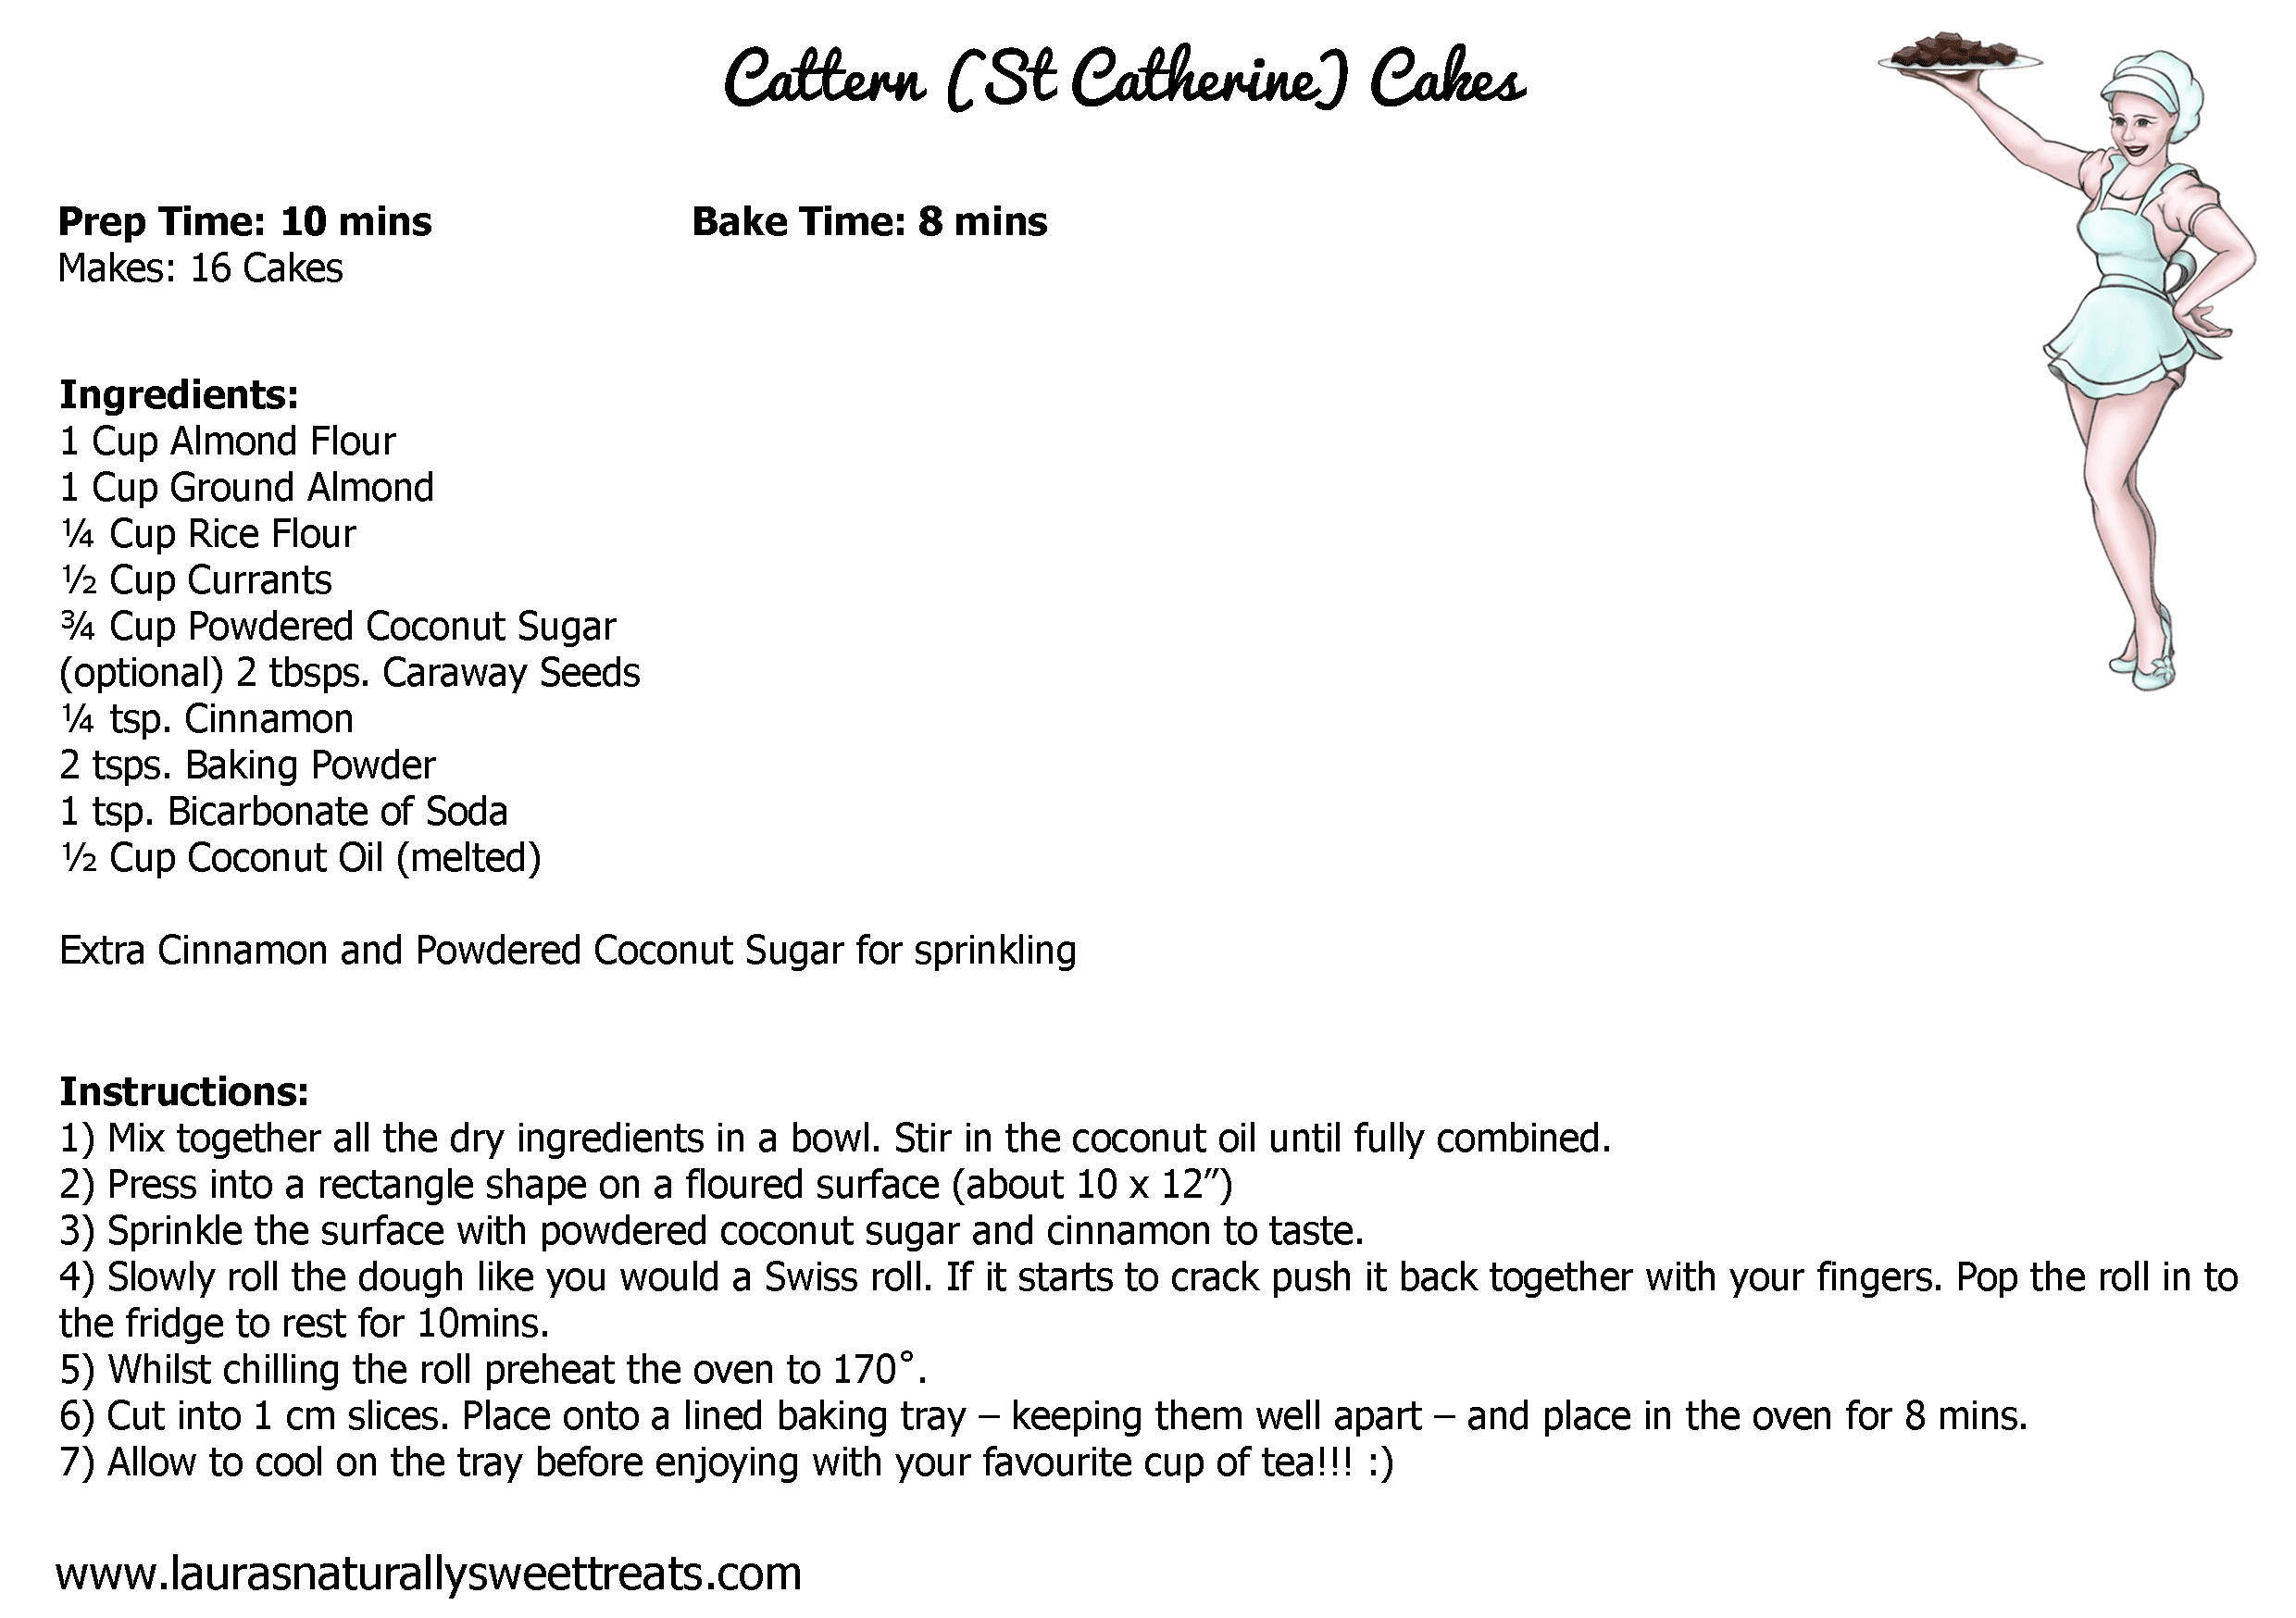 cattern st catherine cakes recipe card